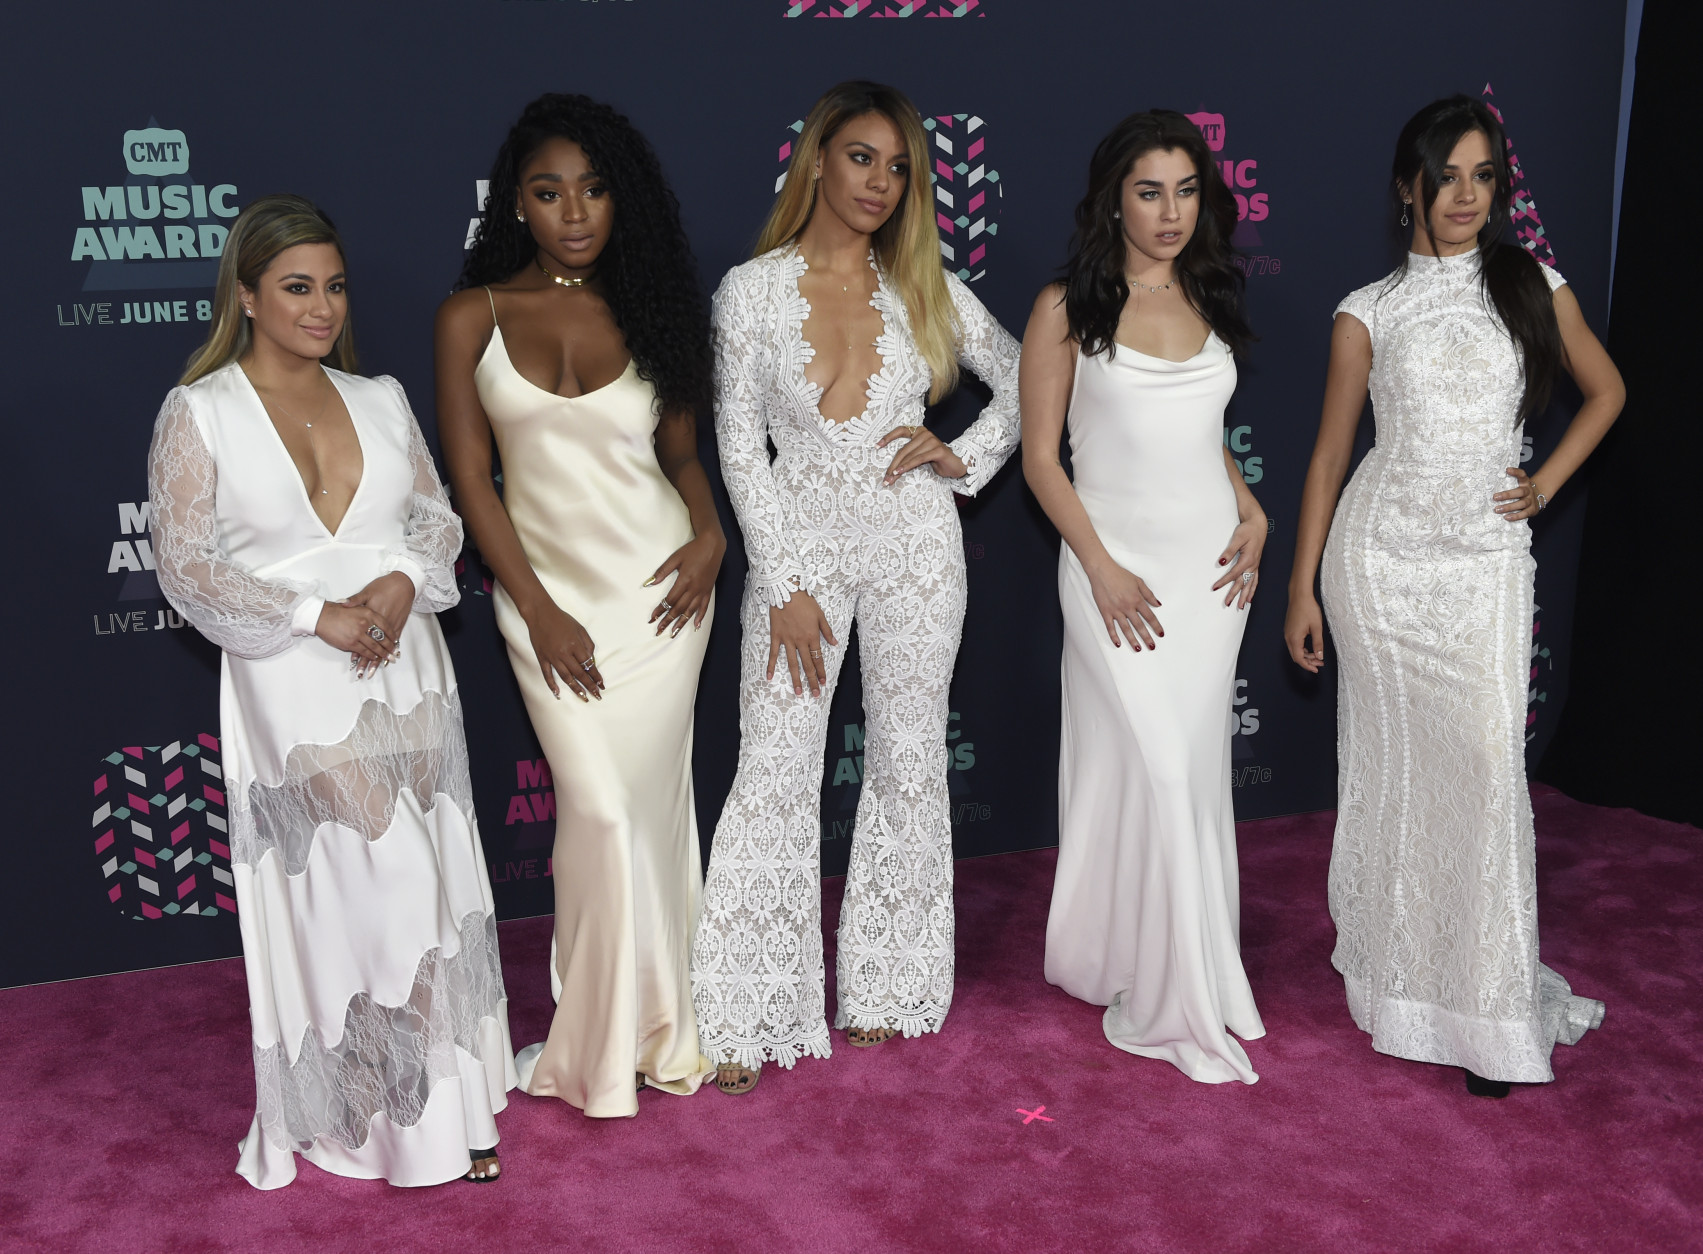 Members of Fifth Harmony, from left, Ally Brooke, Normani Kordei, Dinah Jane, Lauren Jauregui, and Camila Cabello arrive at the CMT Music Awards at the Bridgestone Arena on Wednesday, June 8, 2016, in Nashville, Tenn. (Photo by Sanford Myers/Invision/AP)